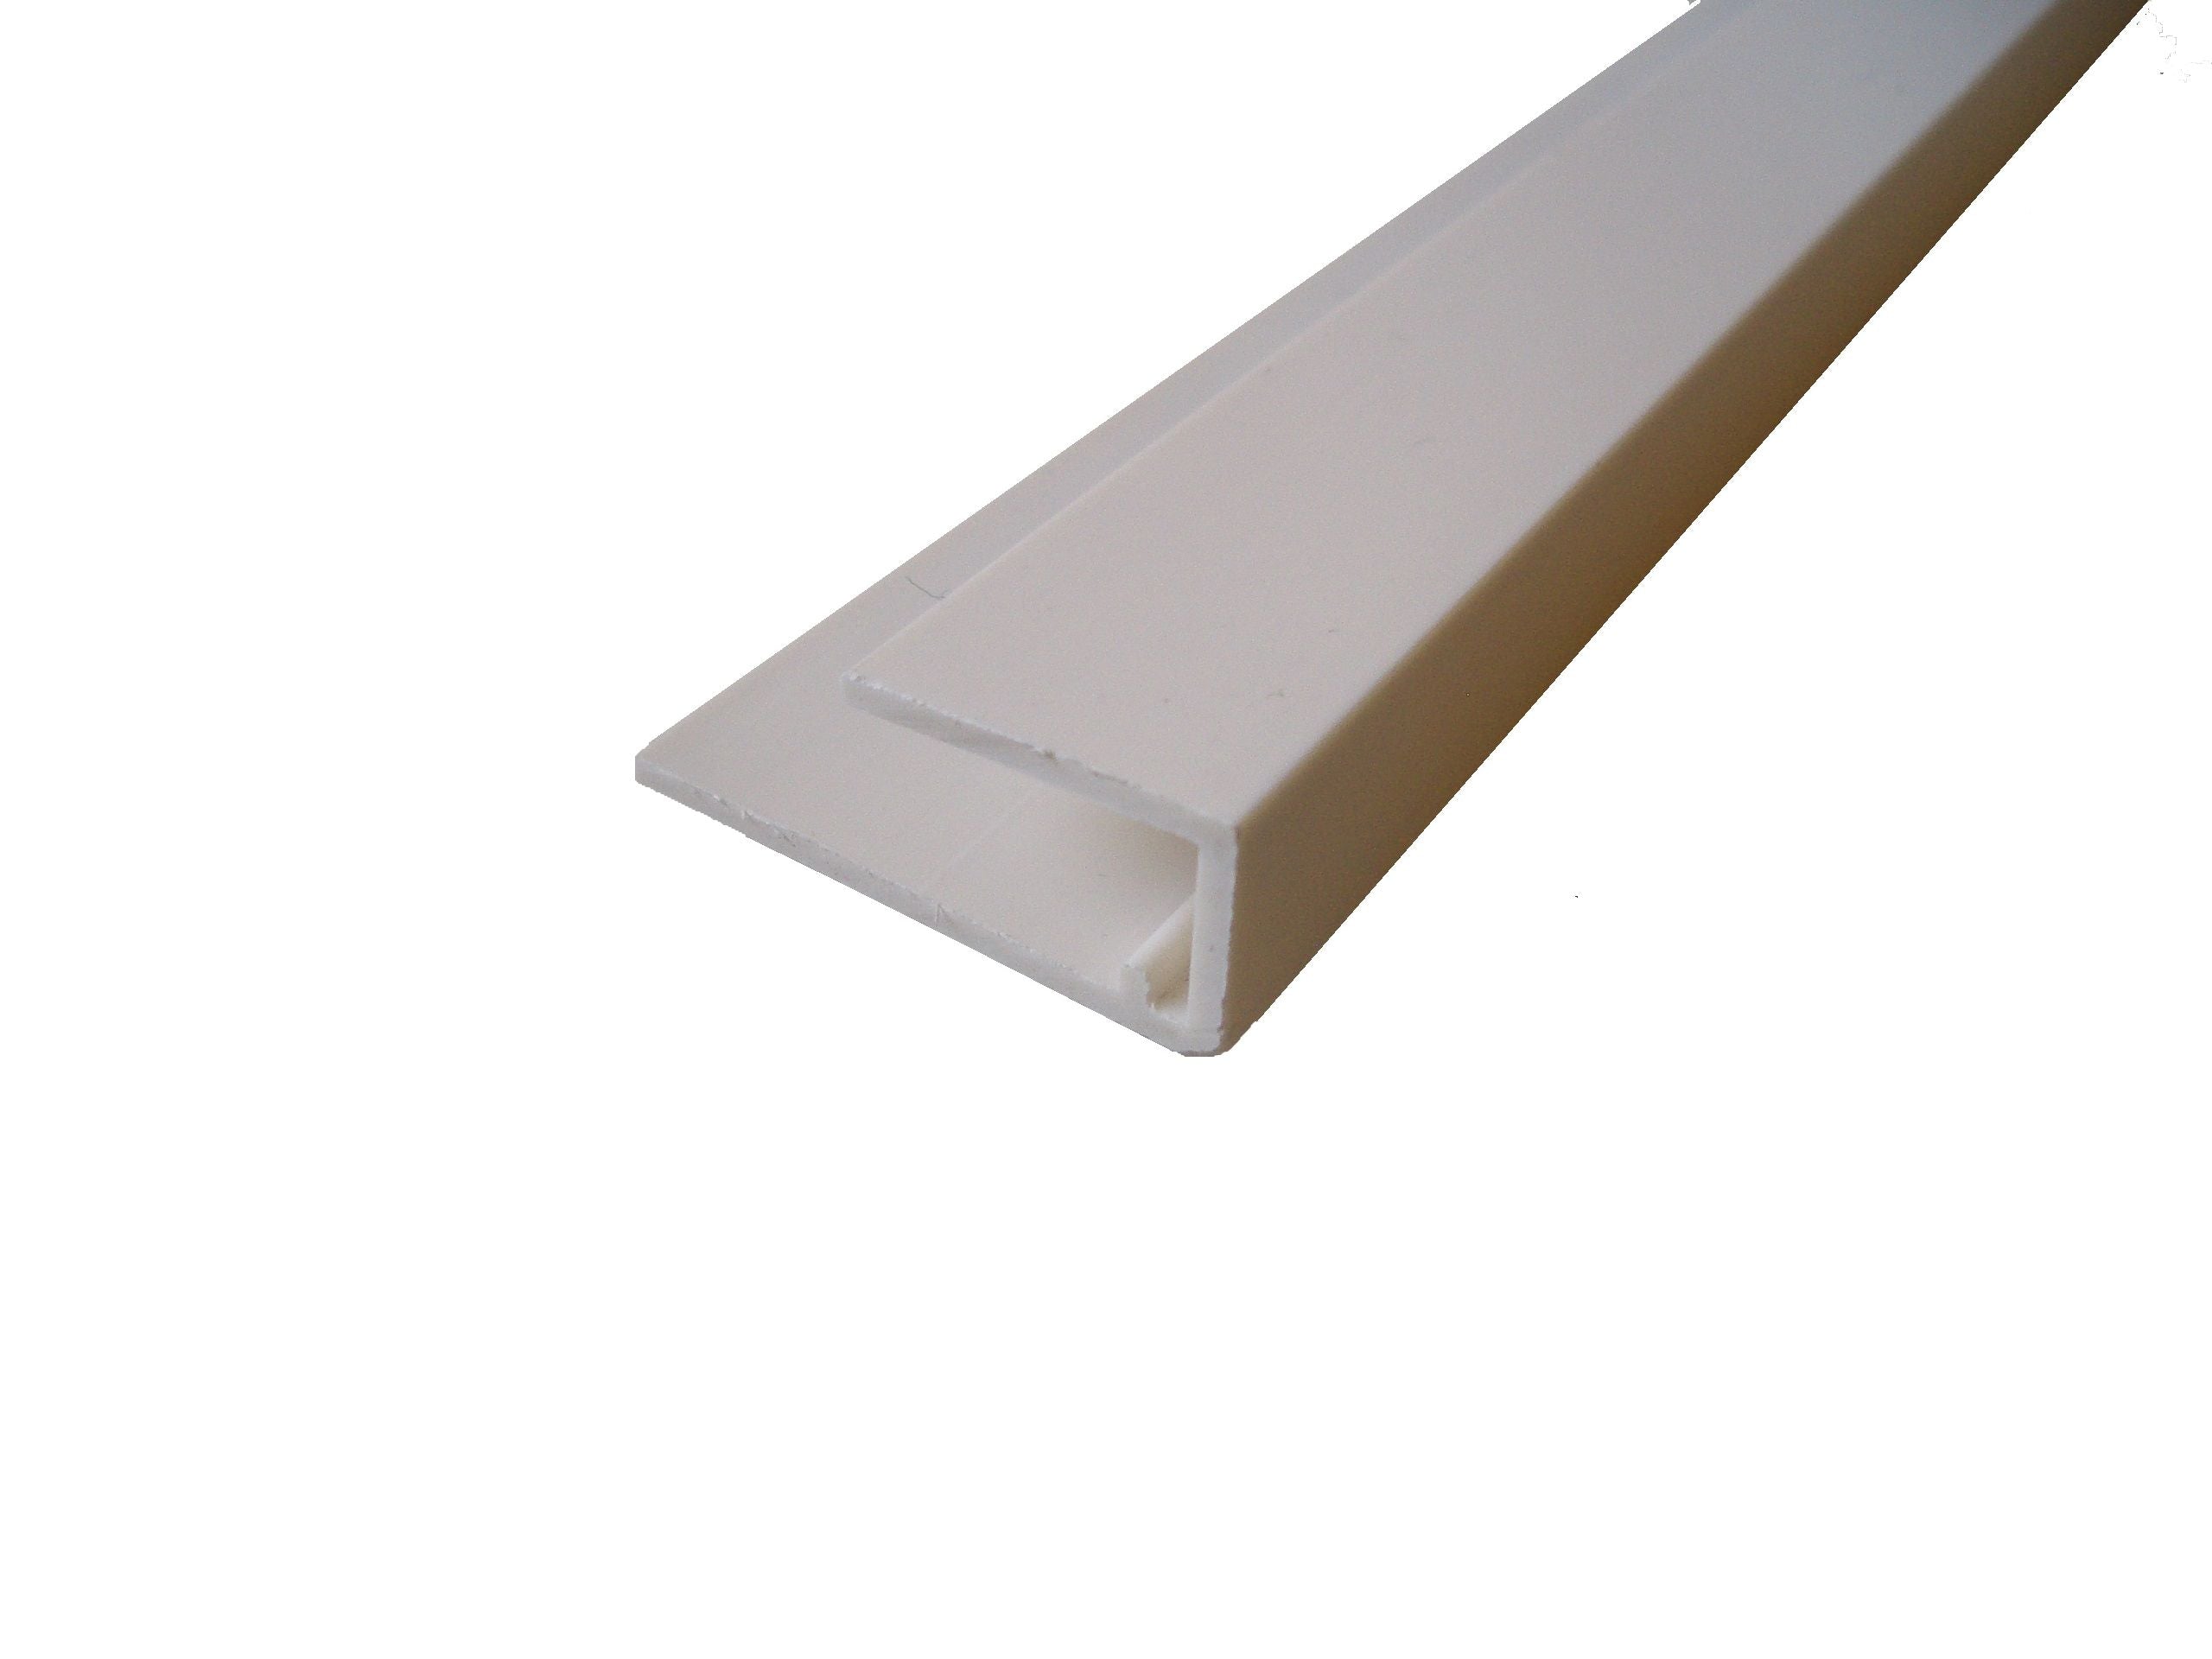 Cladding Worlds universal trims offer the perfect finish to complete the look of the panel in any room. Used for door frames.